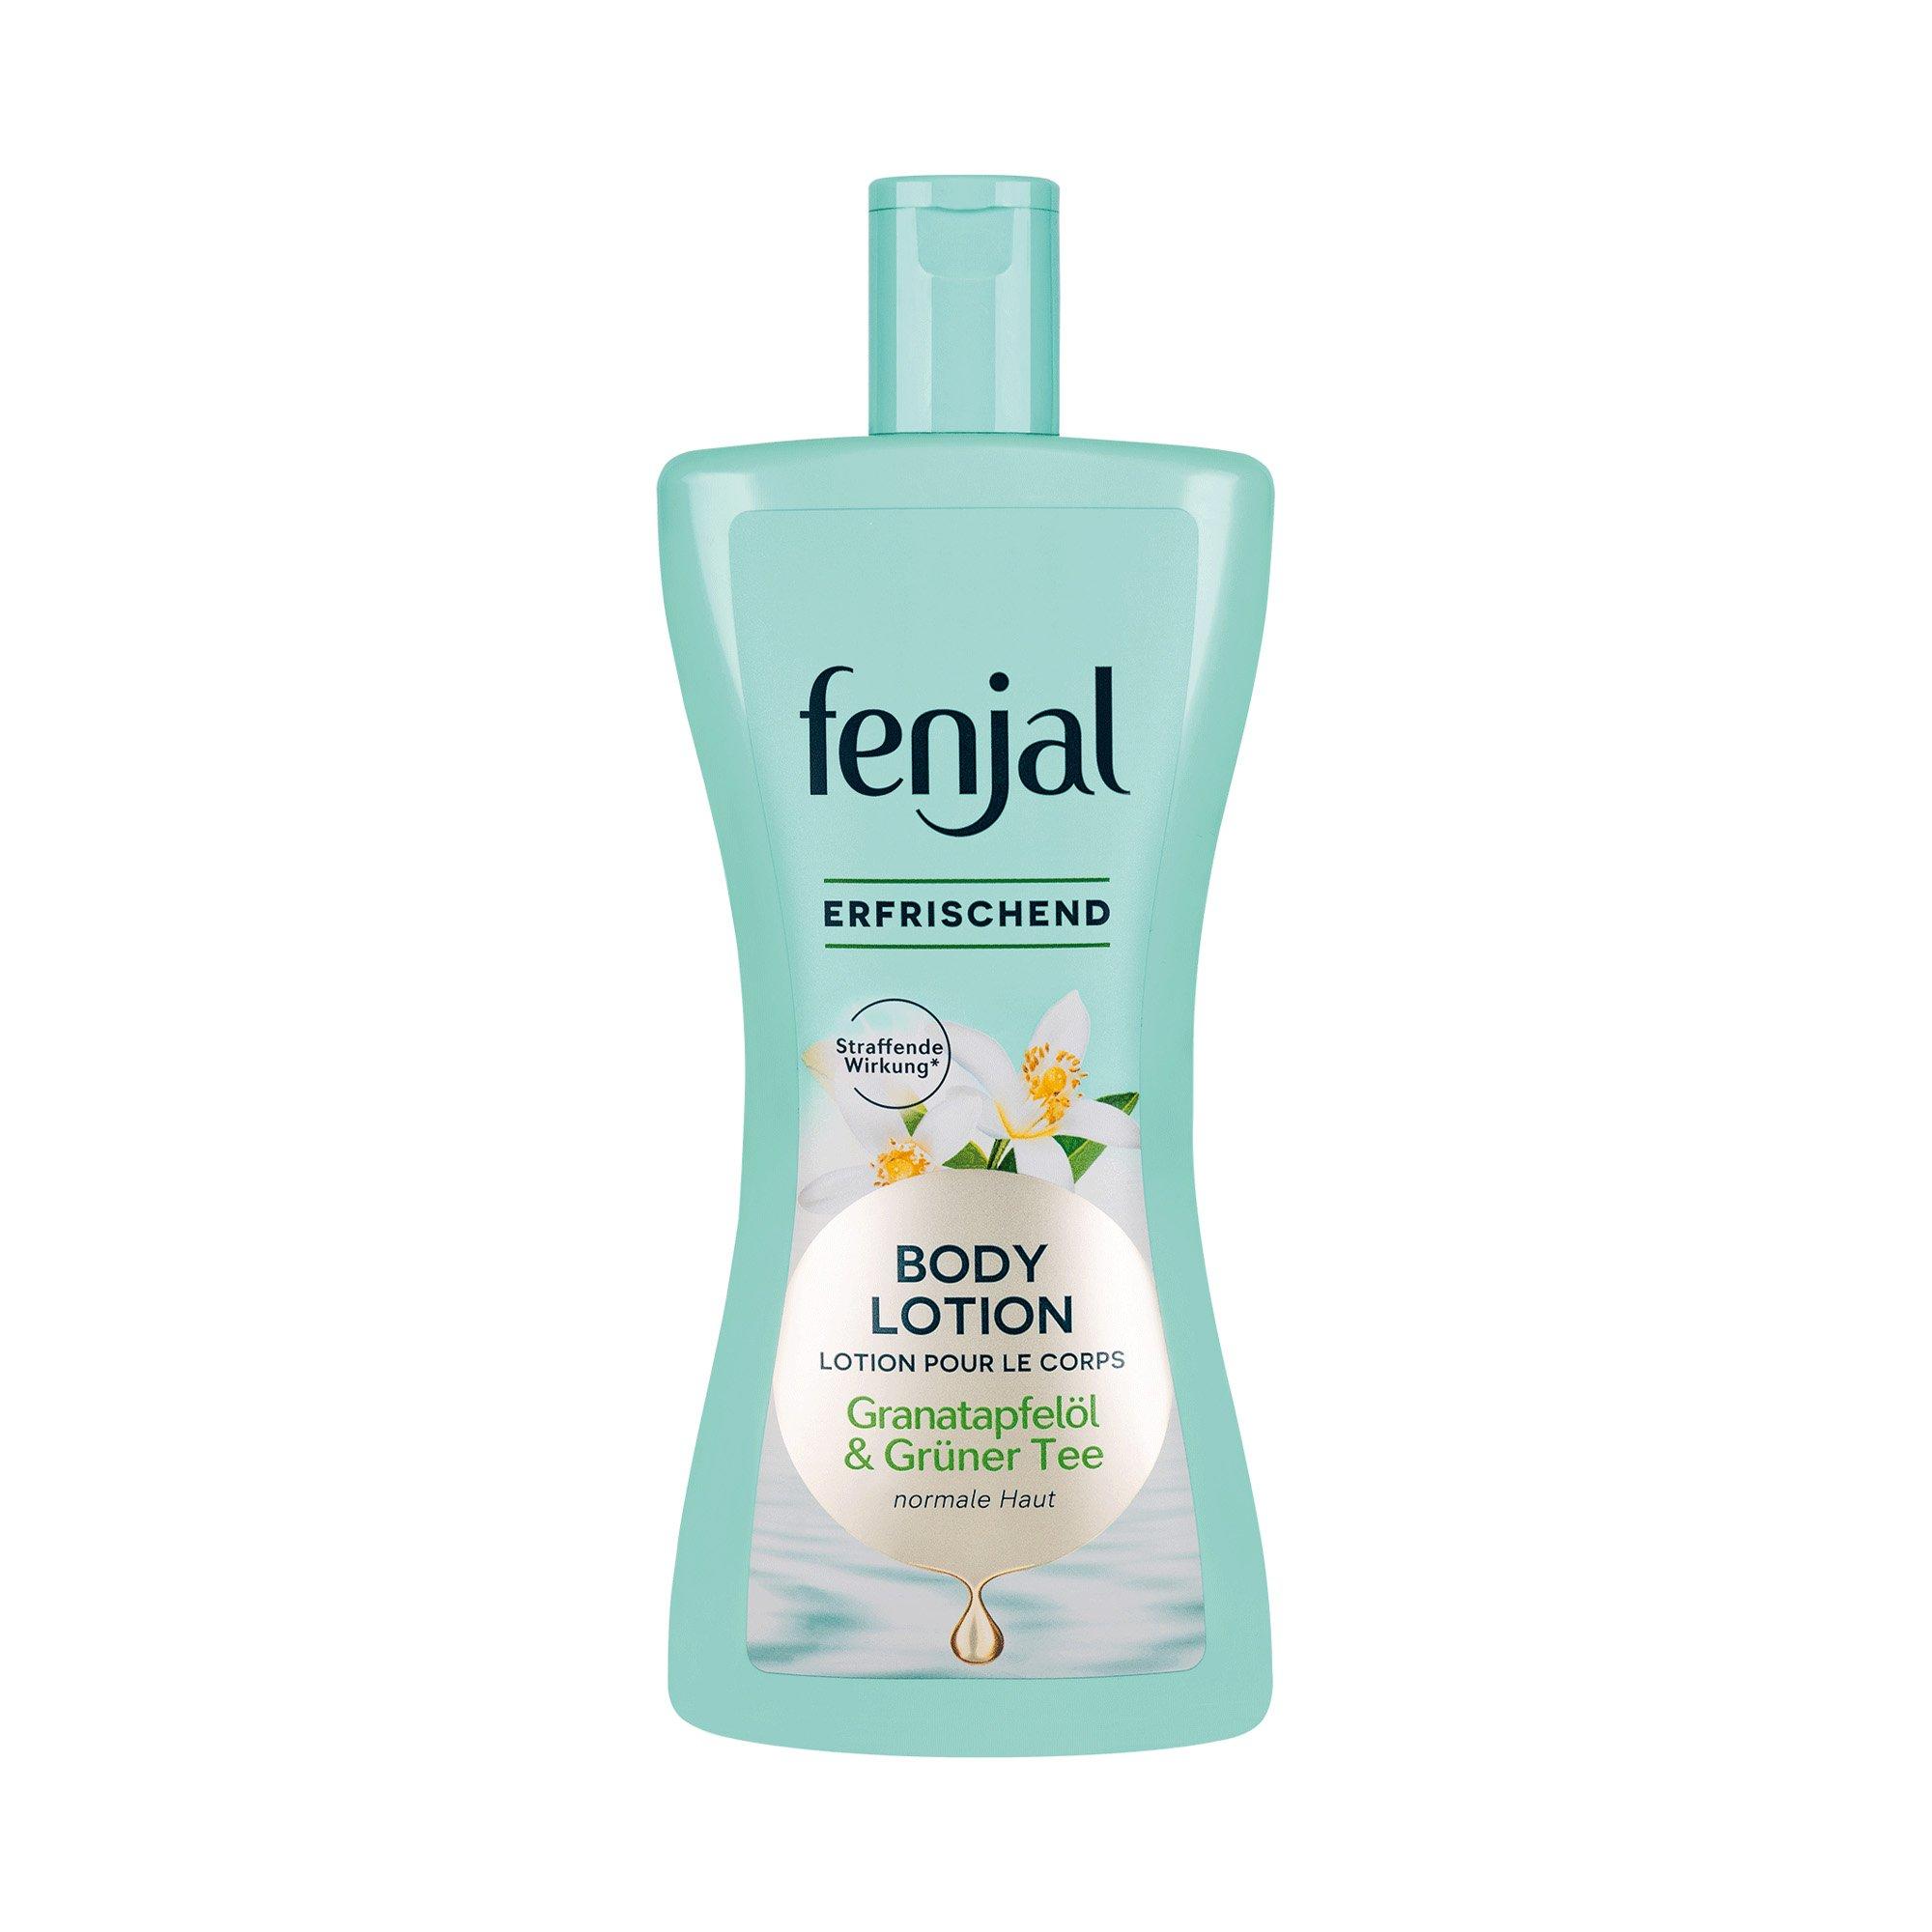 Image of fenjal Body Lotion Erfrischend - 400ml